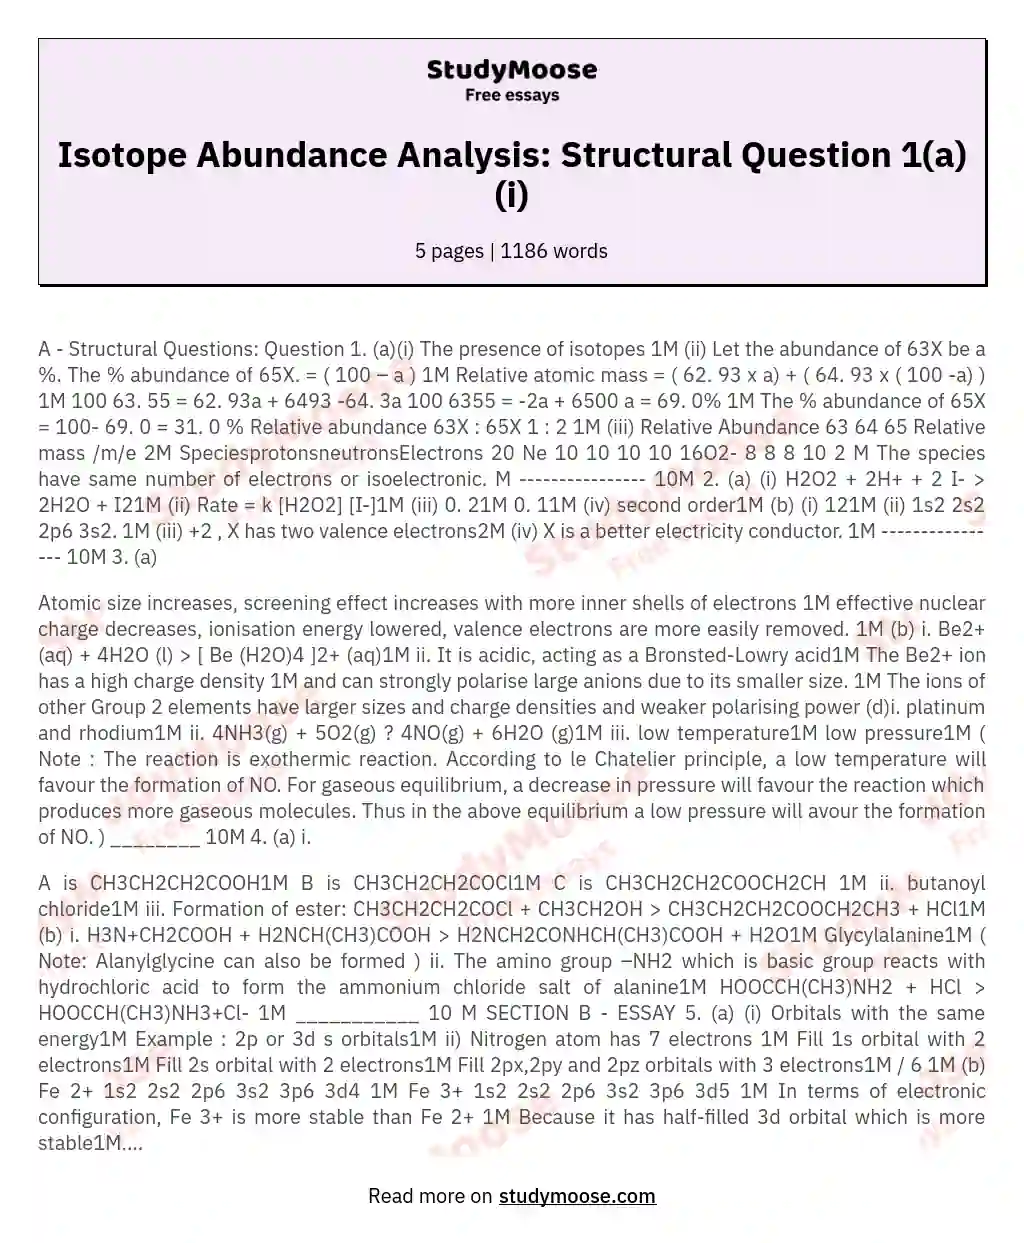 Isotope Abundance Analysis: Structural Question 1(a)(i) essay